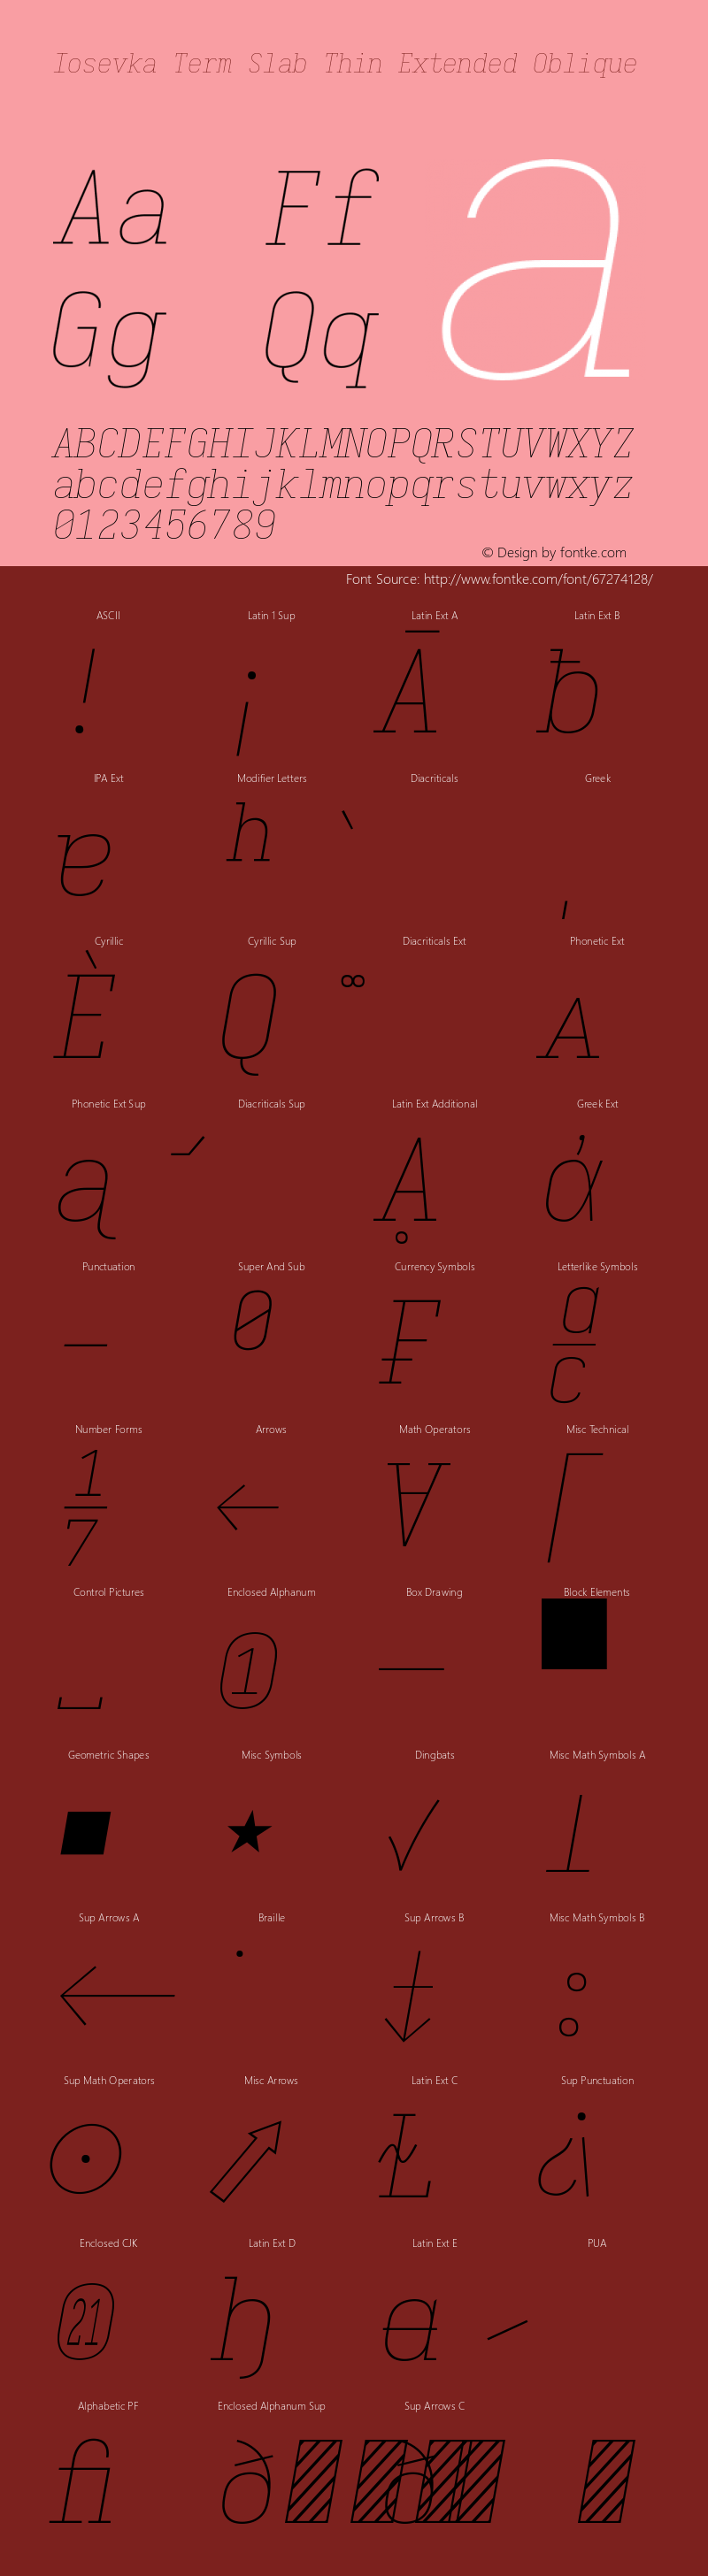 Iosevka Term Slab Thin Extended Oblique 3.0.0-rc.7 Font Sample